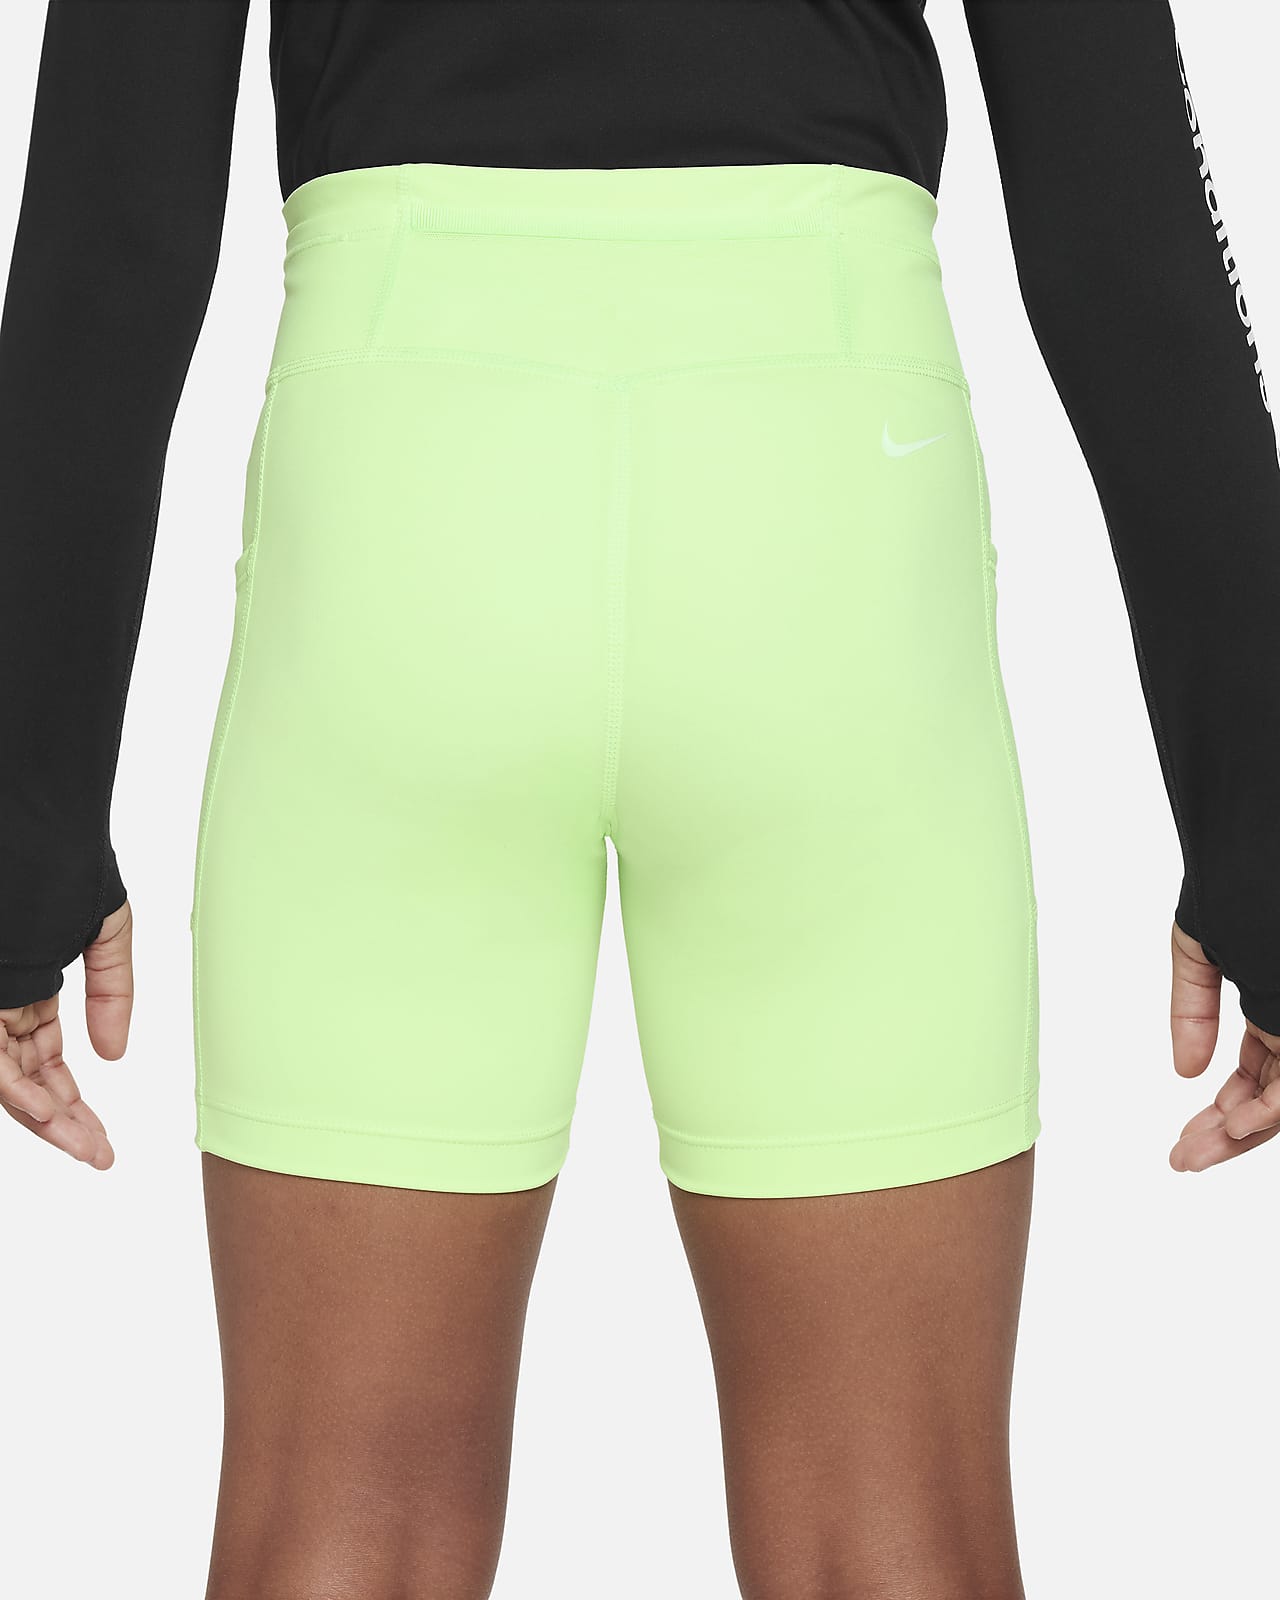 Nike Atletic Shorts Sport Shorts w/ Cycling for Girls